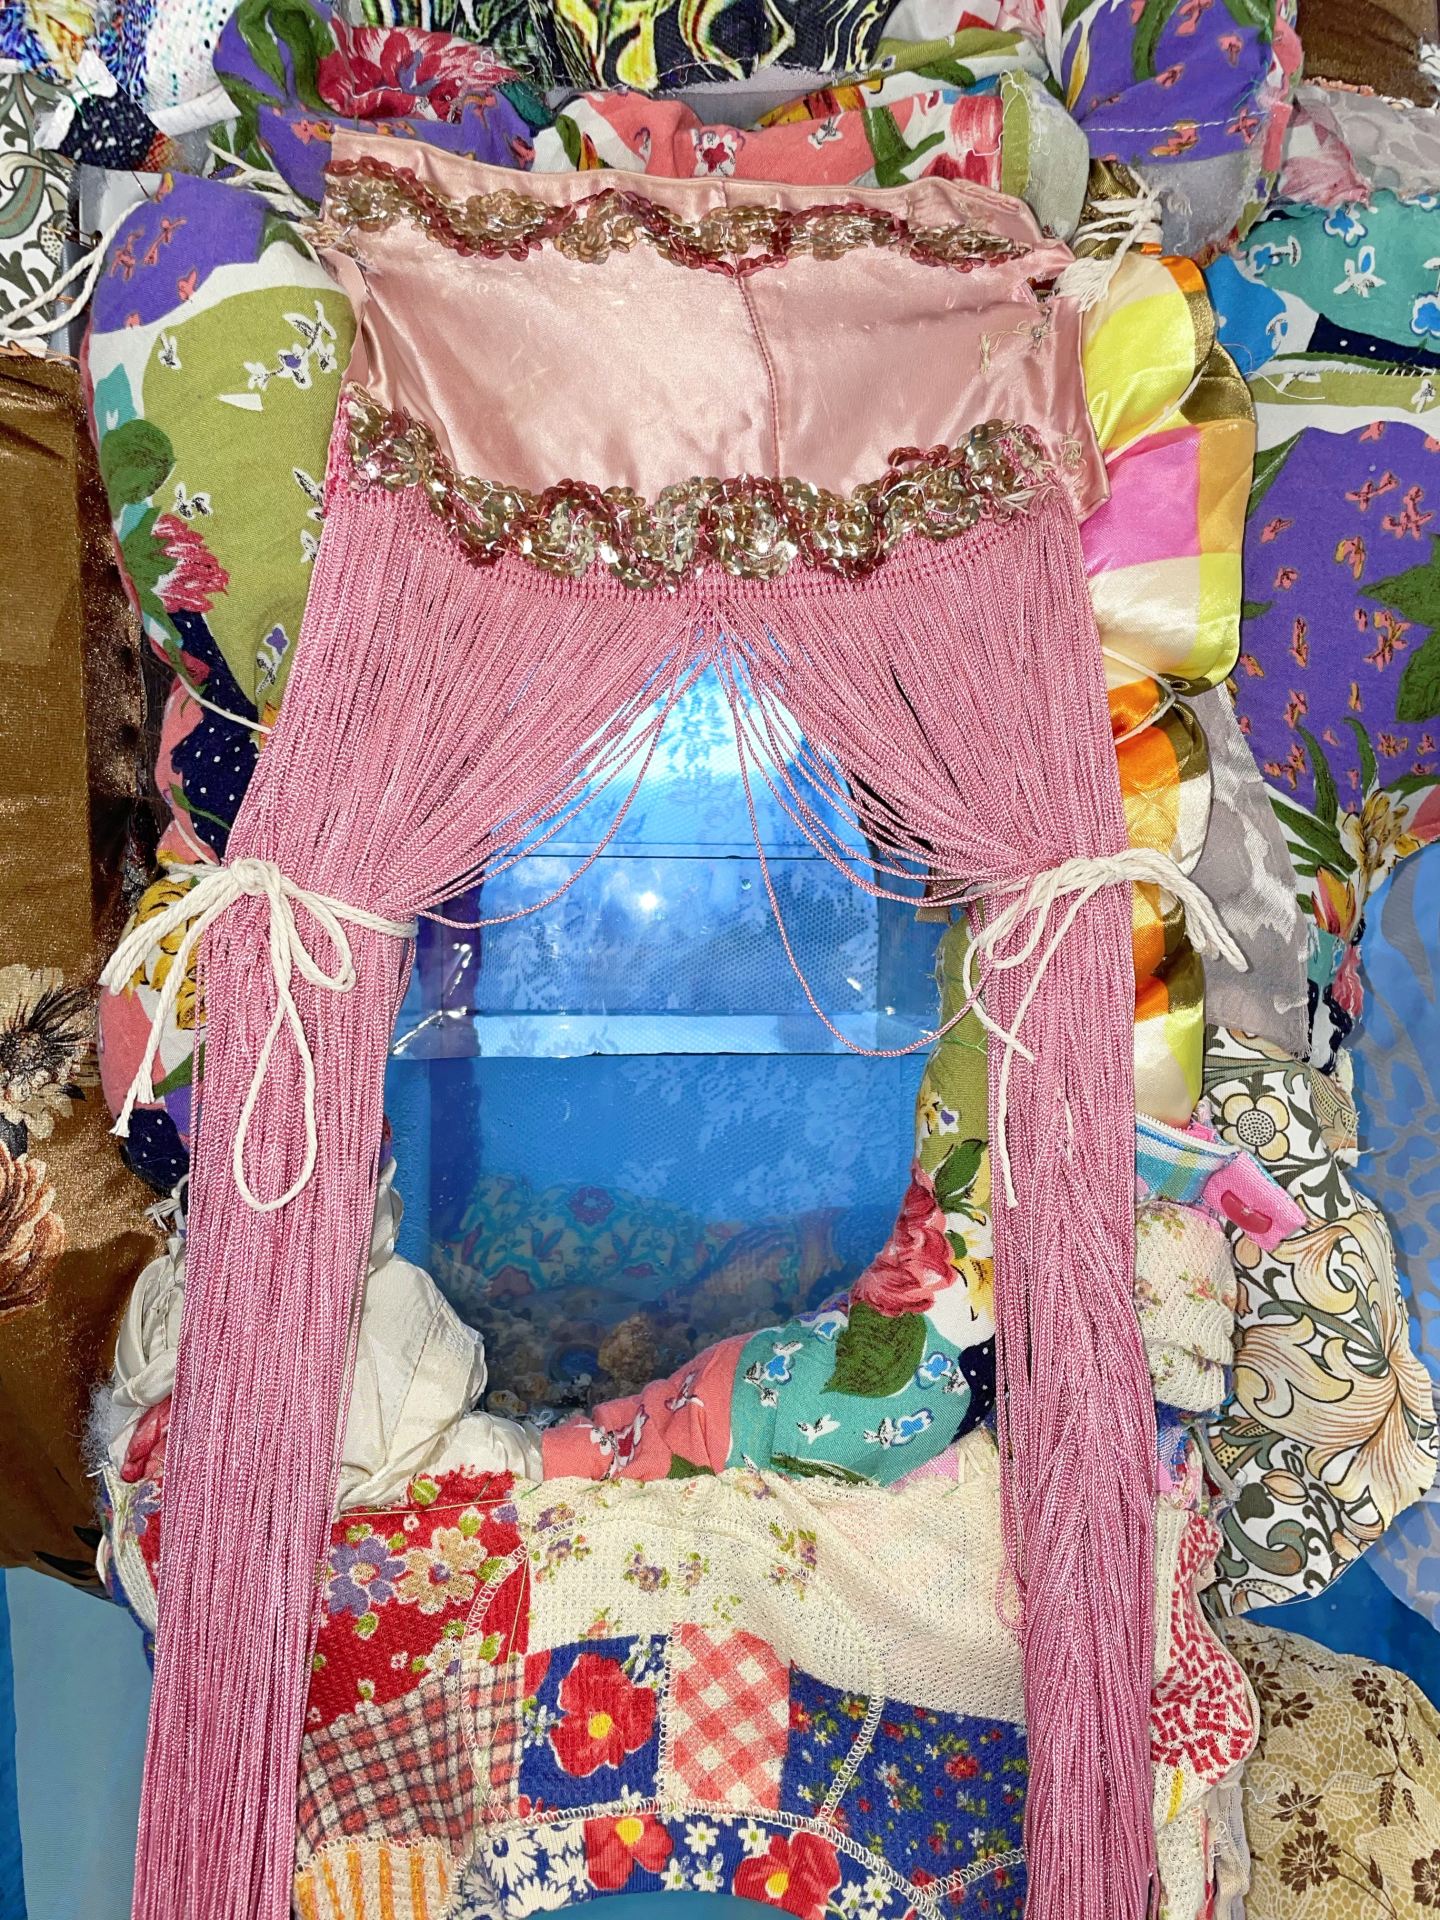 A fabric sculpture in the form of a god with a number of devices for wishing, such as wishing candles, wishing wells and shooting star launchers.